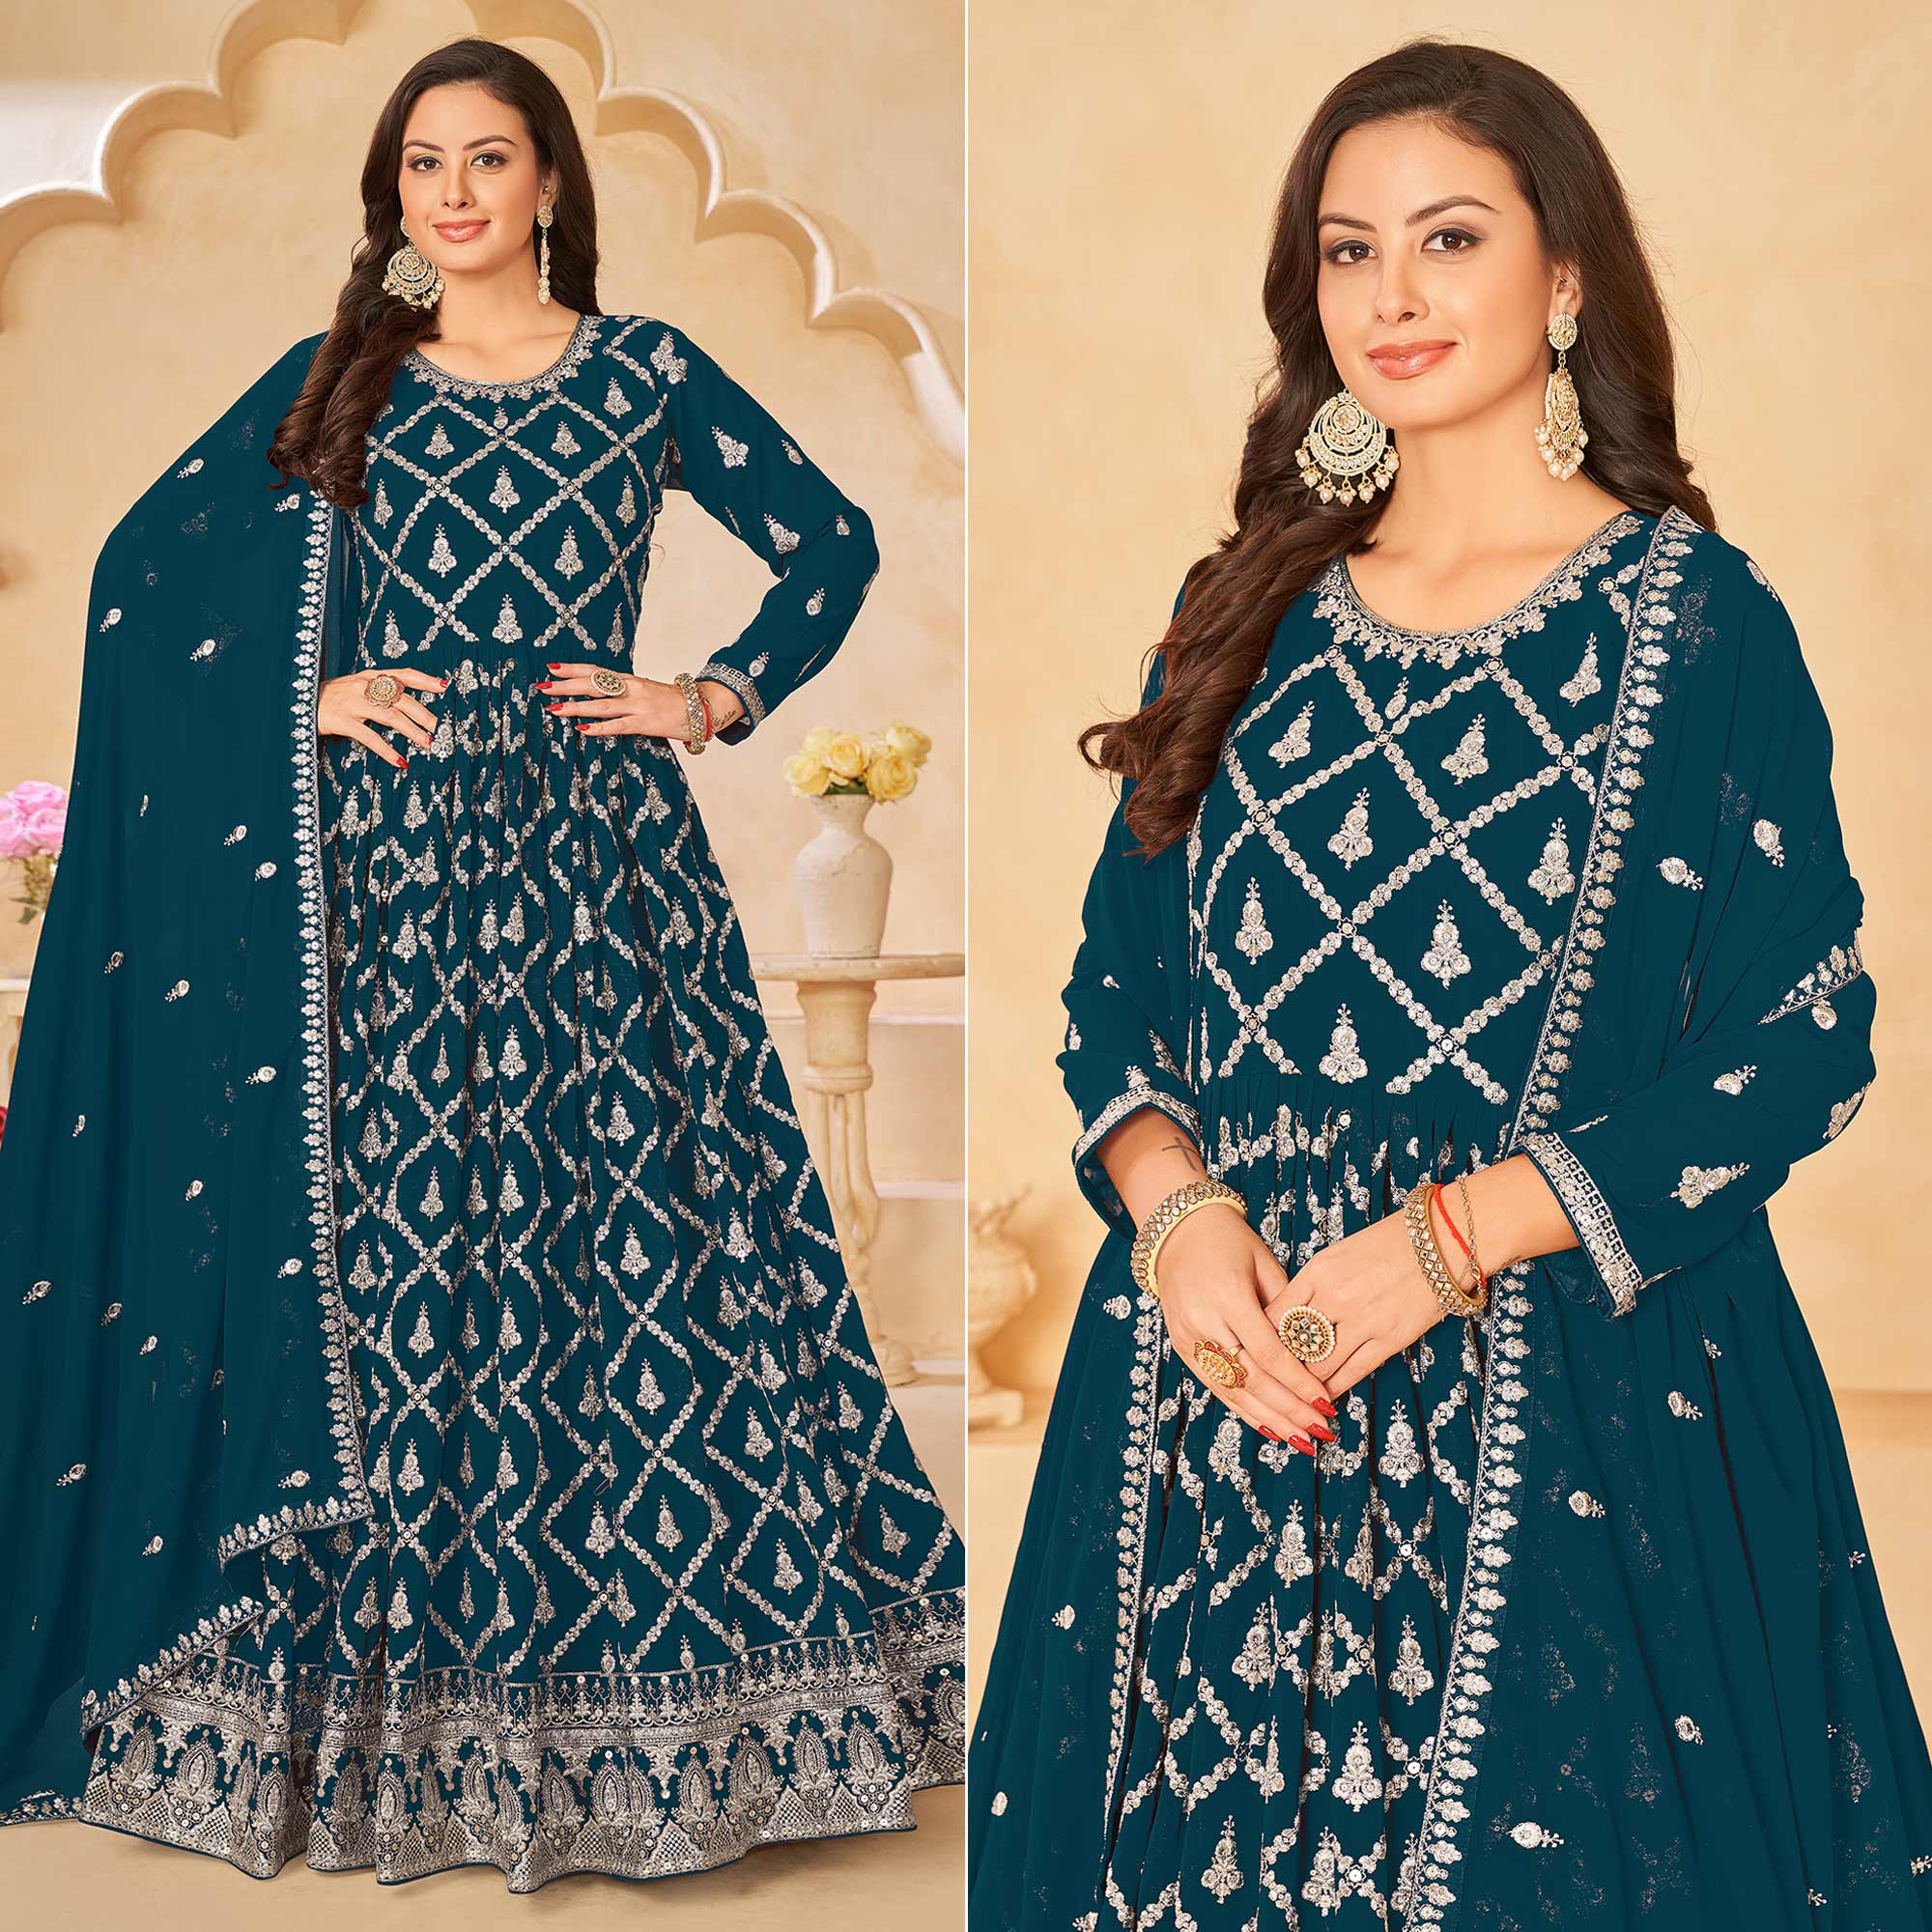 Morpich Floral Embroidered Georgette Semi Stitched Anarkali Suit